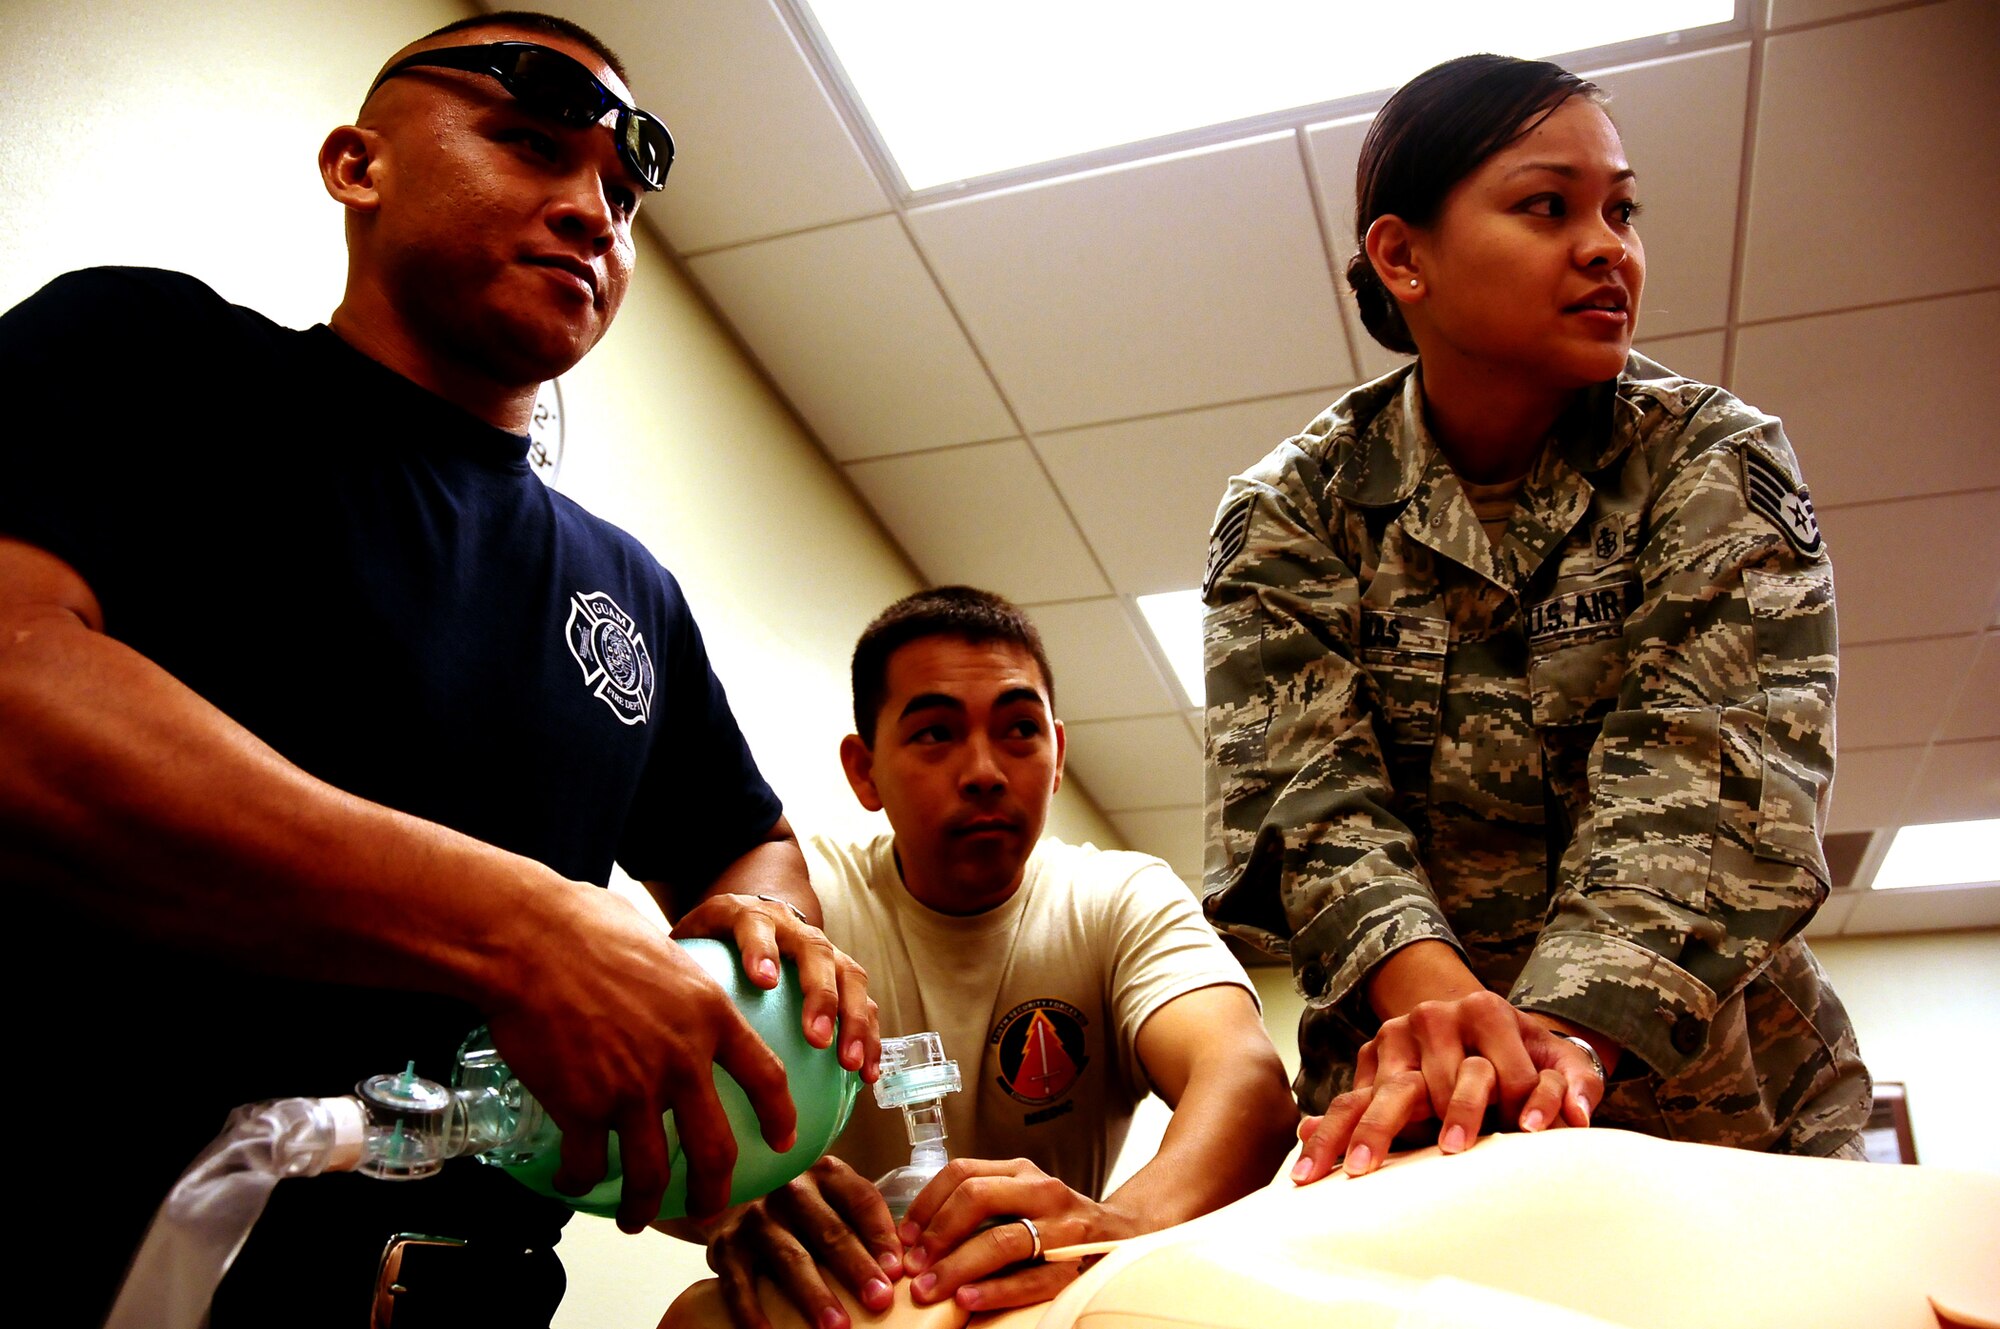 ANDERSEN AIR FORCE BASE, Guam – Army National Guard Sgt. Joe Sablan, Guam Fire Deptarment, Staff Sgt. Jon-Jay Sabati and Staff Sgt. Tiana Duenas  , 736th Security Forces Squadron Commando Warrior Pacific Air Forces Regional Training Center, administer first-aid on a SimMan 3G mannequin Aug. 5, at the Commando Warrior Regional Training Center. SimMan 3G, a realistic human patient simulator created by a major medical equipment manufacturer,  is designed to provide a more hands on training experience for emergency responders and medics. The 736th SFS’s Commando Warrior Pacific Air Forces Regional Training Center now possesses two. (U.S. Air Force photo by Airman 1st Class Anthony Jennings)